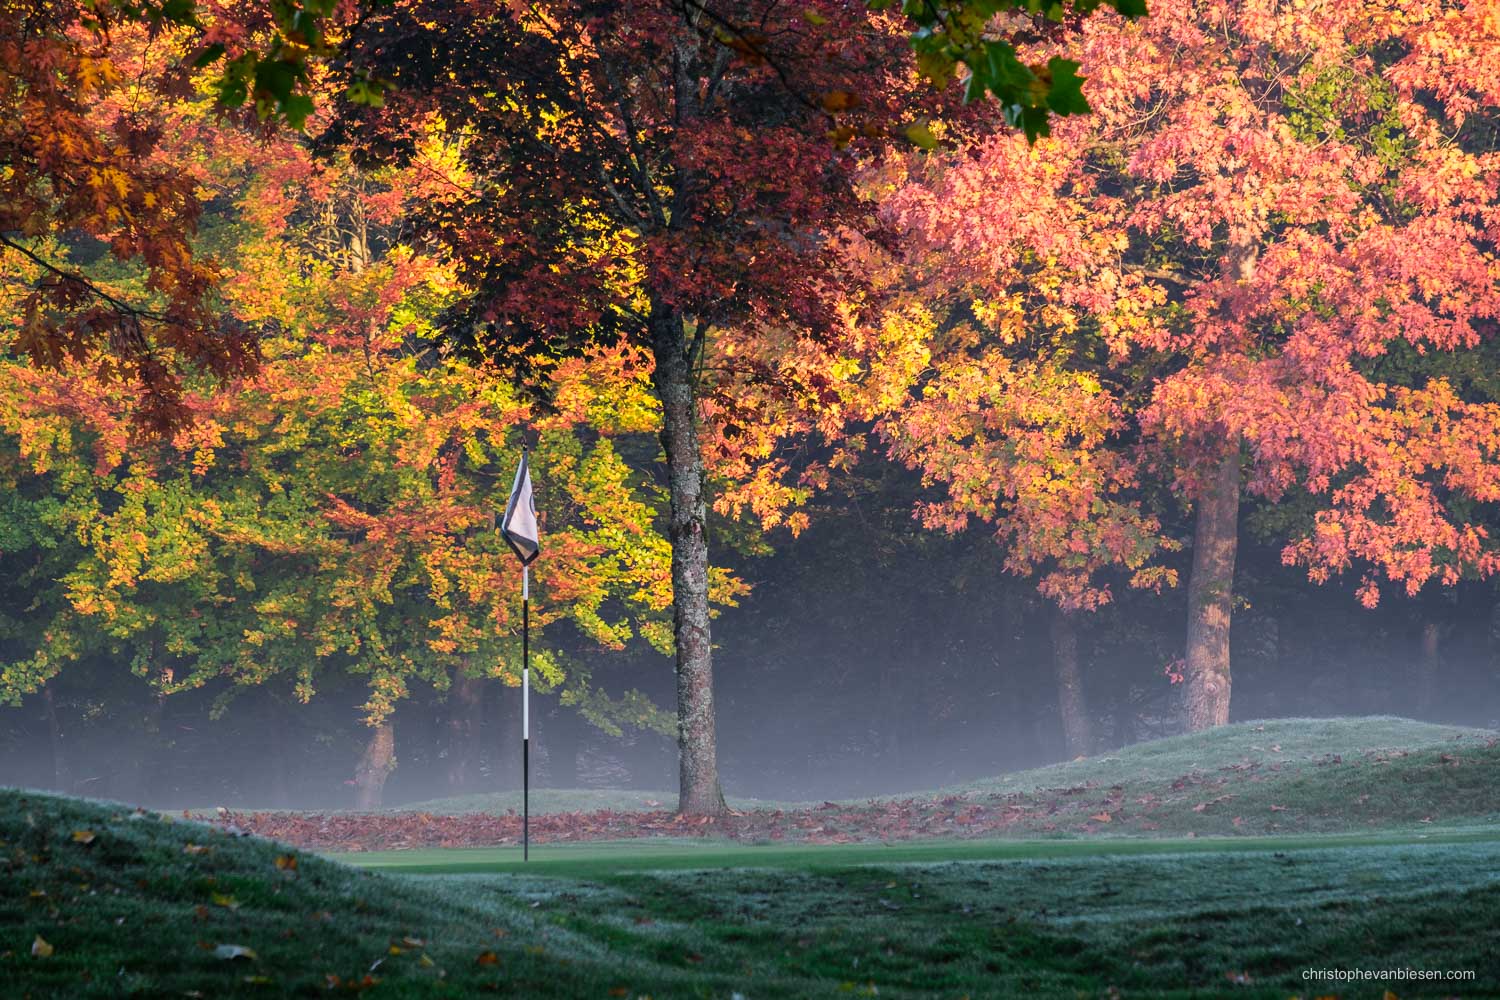 Work with me - Commission Work - Golf Club Grand Ducal Luxembourg Senningerberg - Hole 9 - Photography by Christophe Van Biesen - Luxembourg Landscape and Travel Photographer